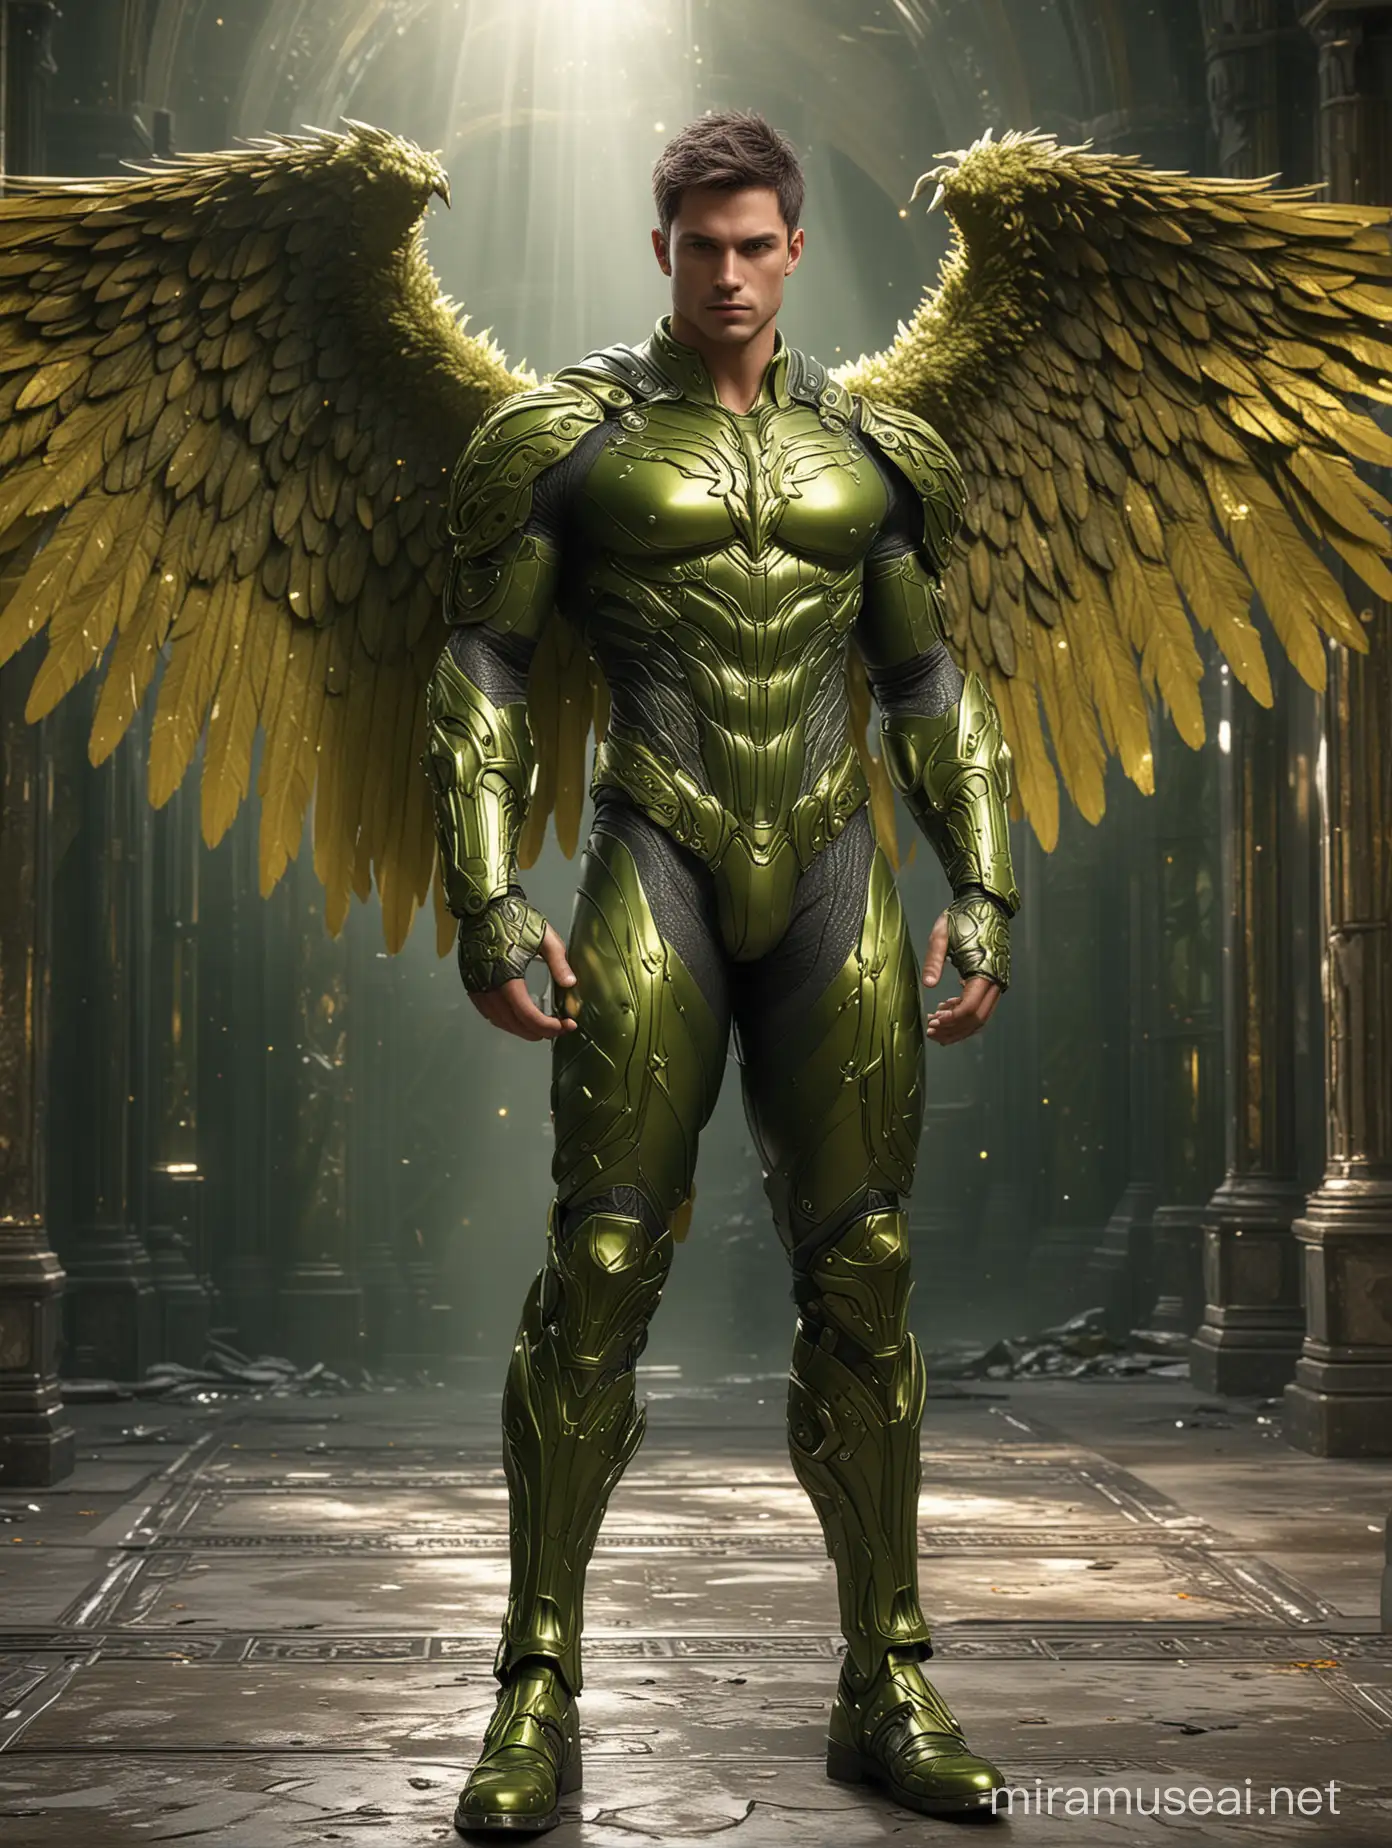 Handsome Fractal Archangel in Chartreuse Bodysuit with Massive Wings